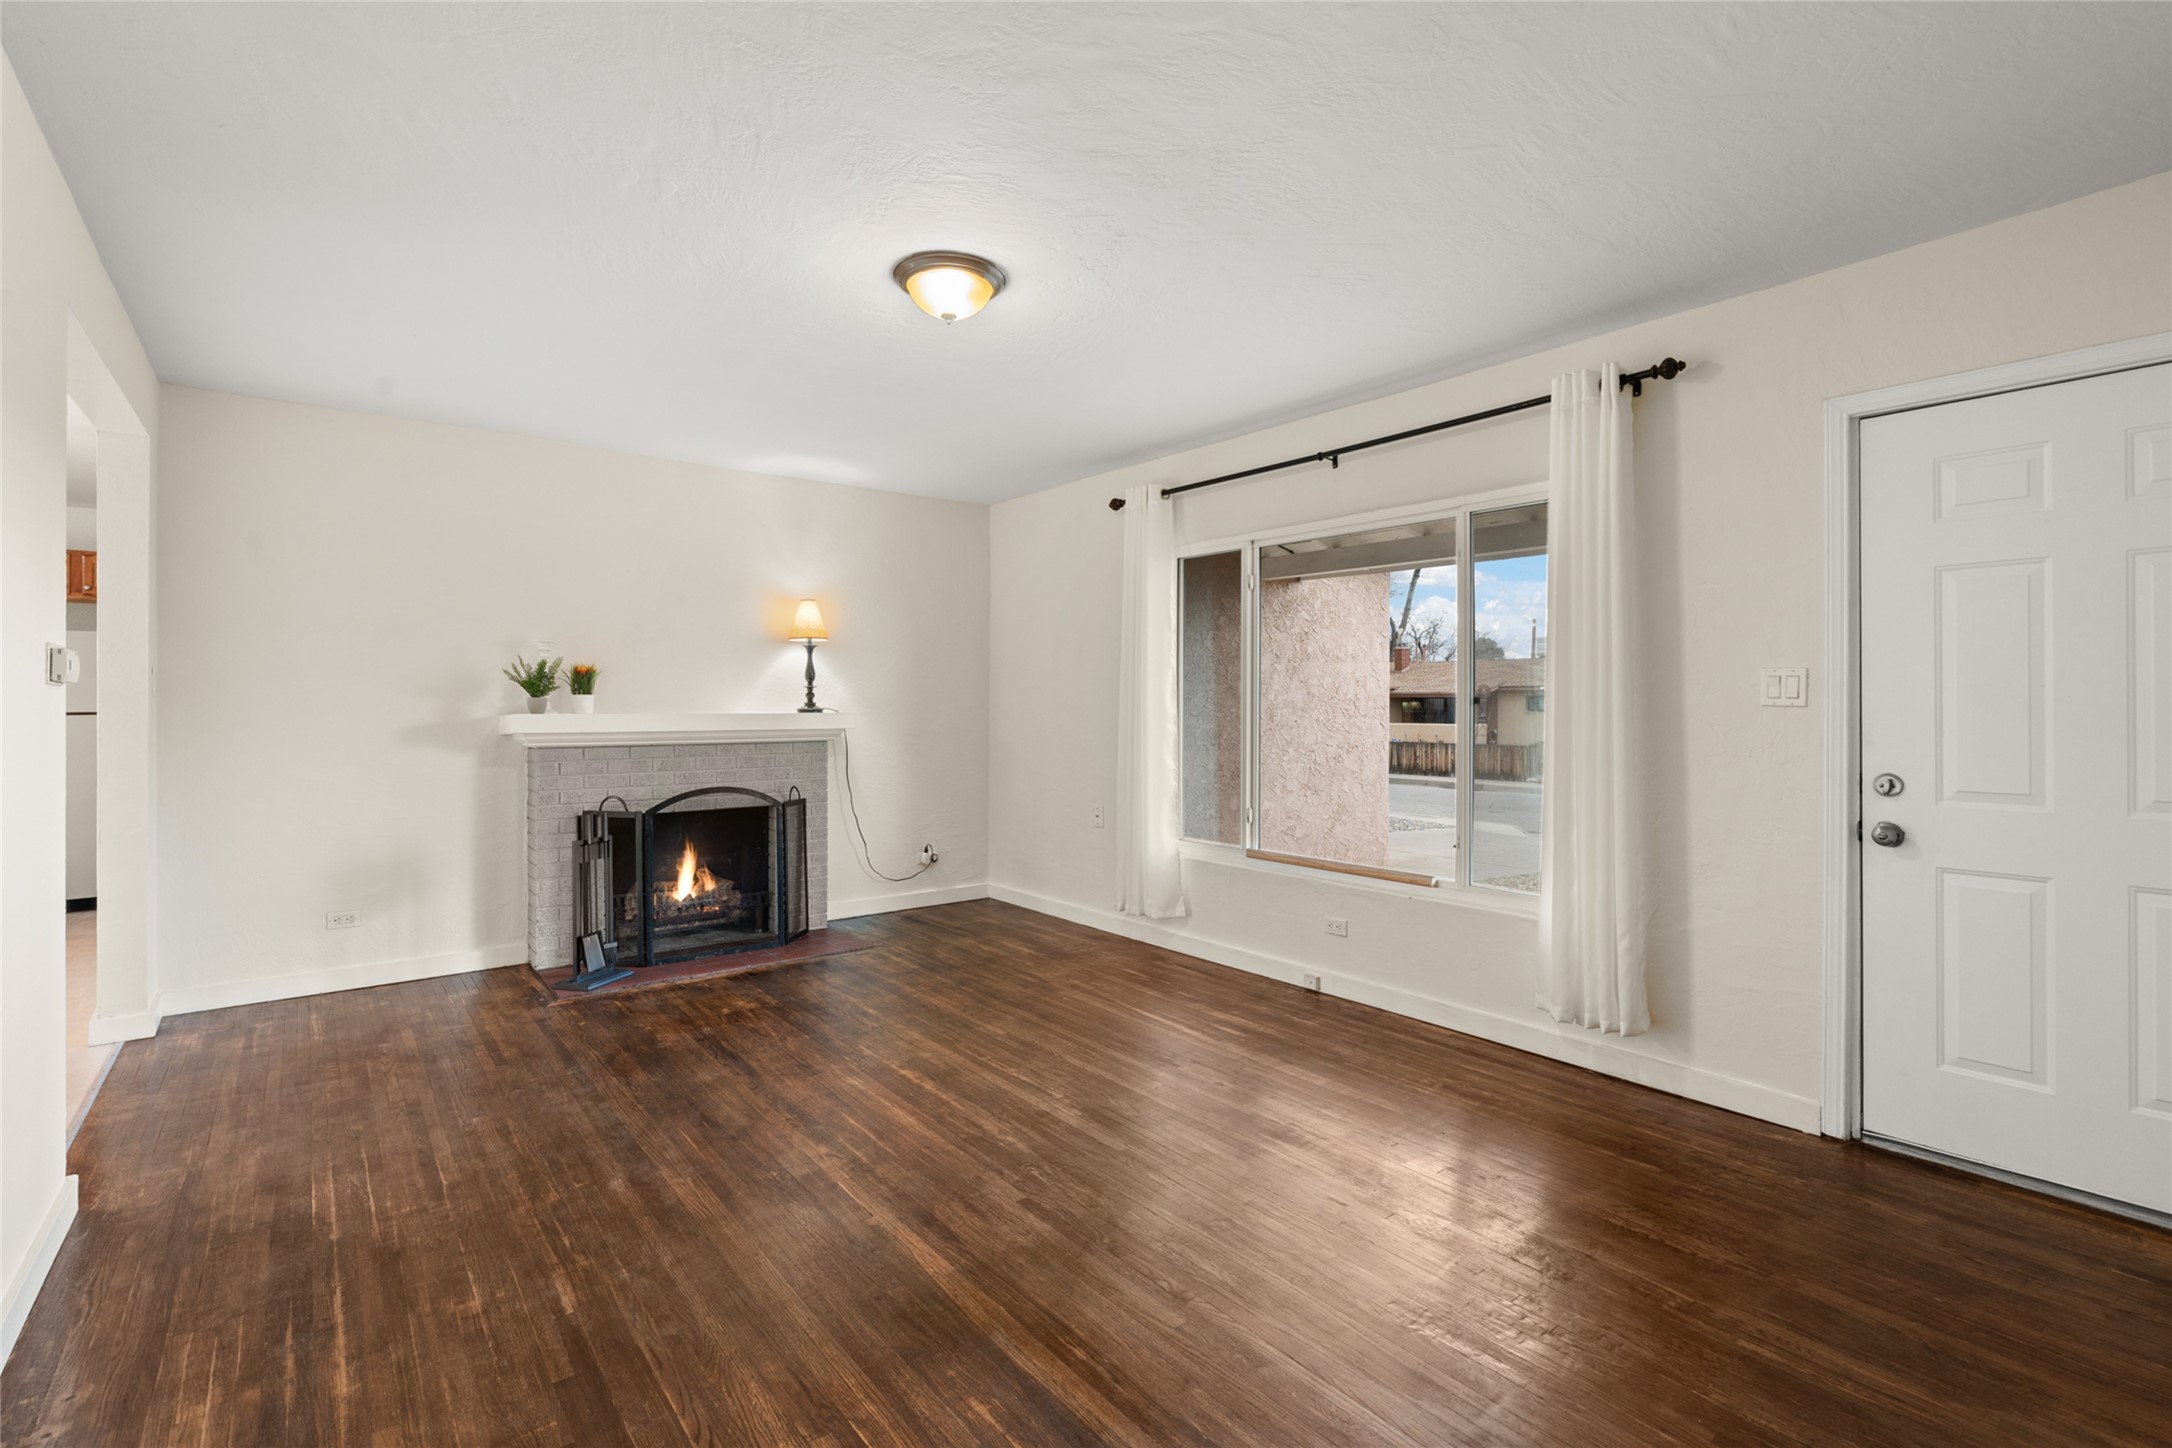 Livingroom with view of wood burning fireplace